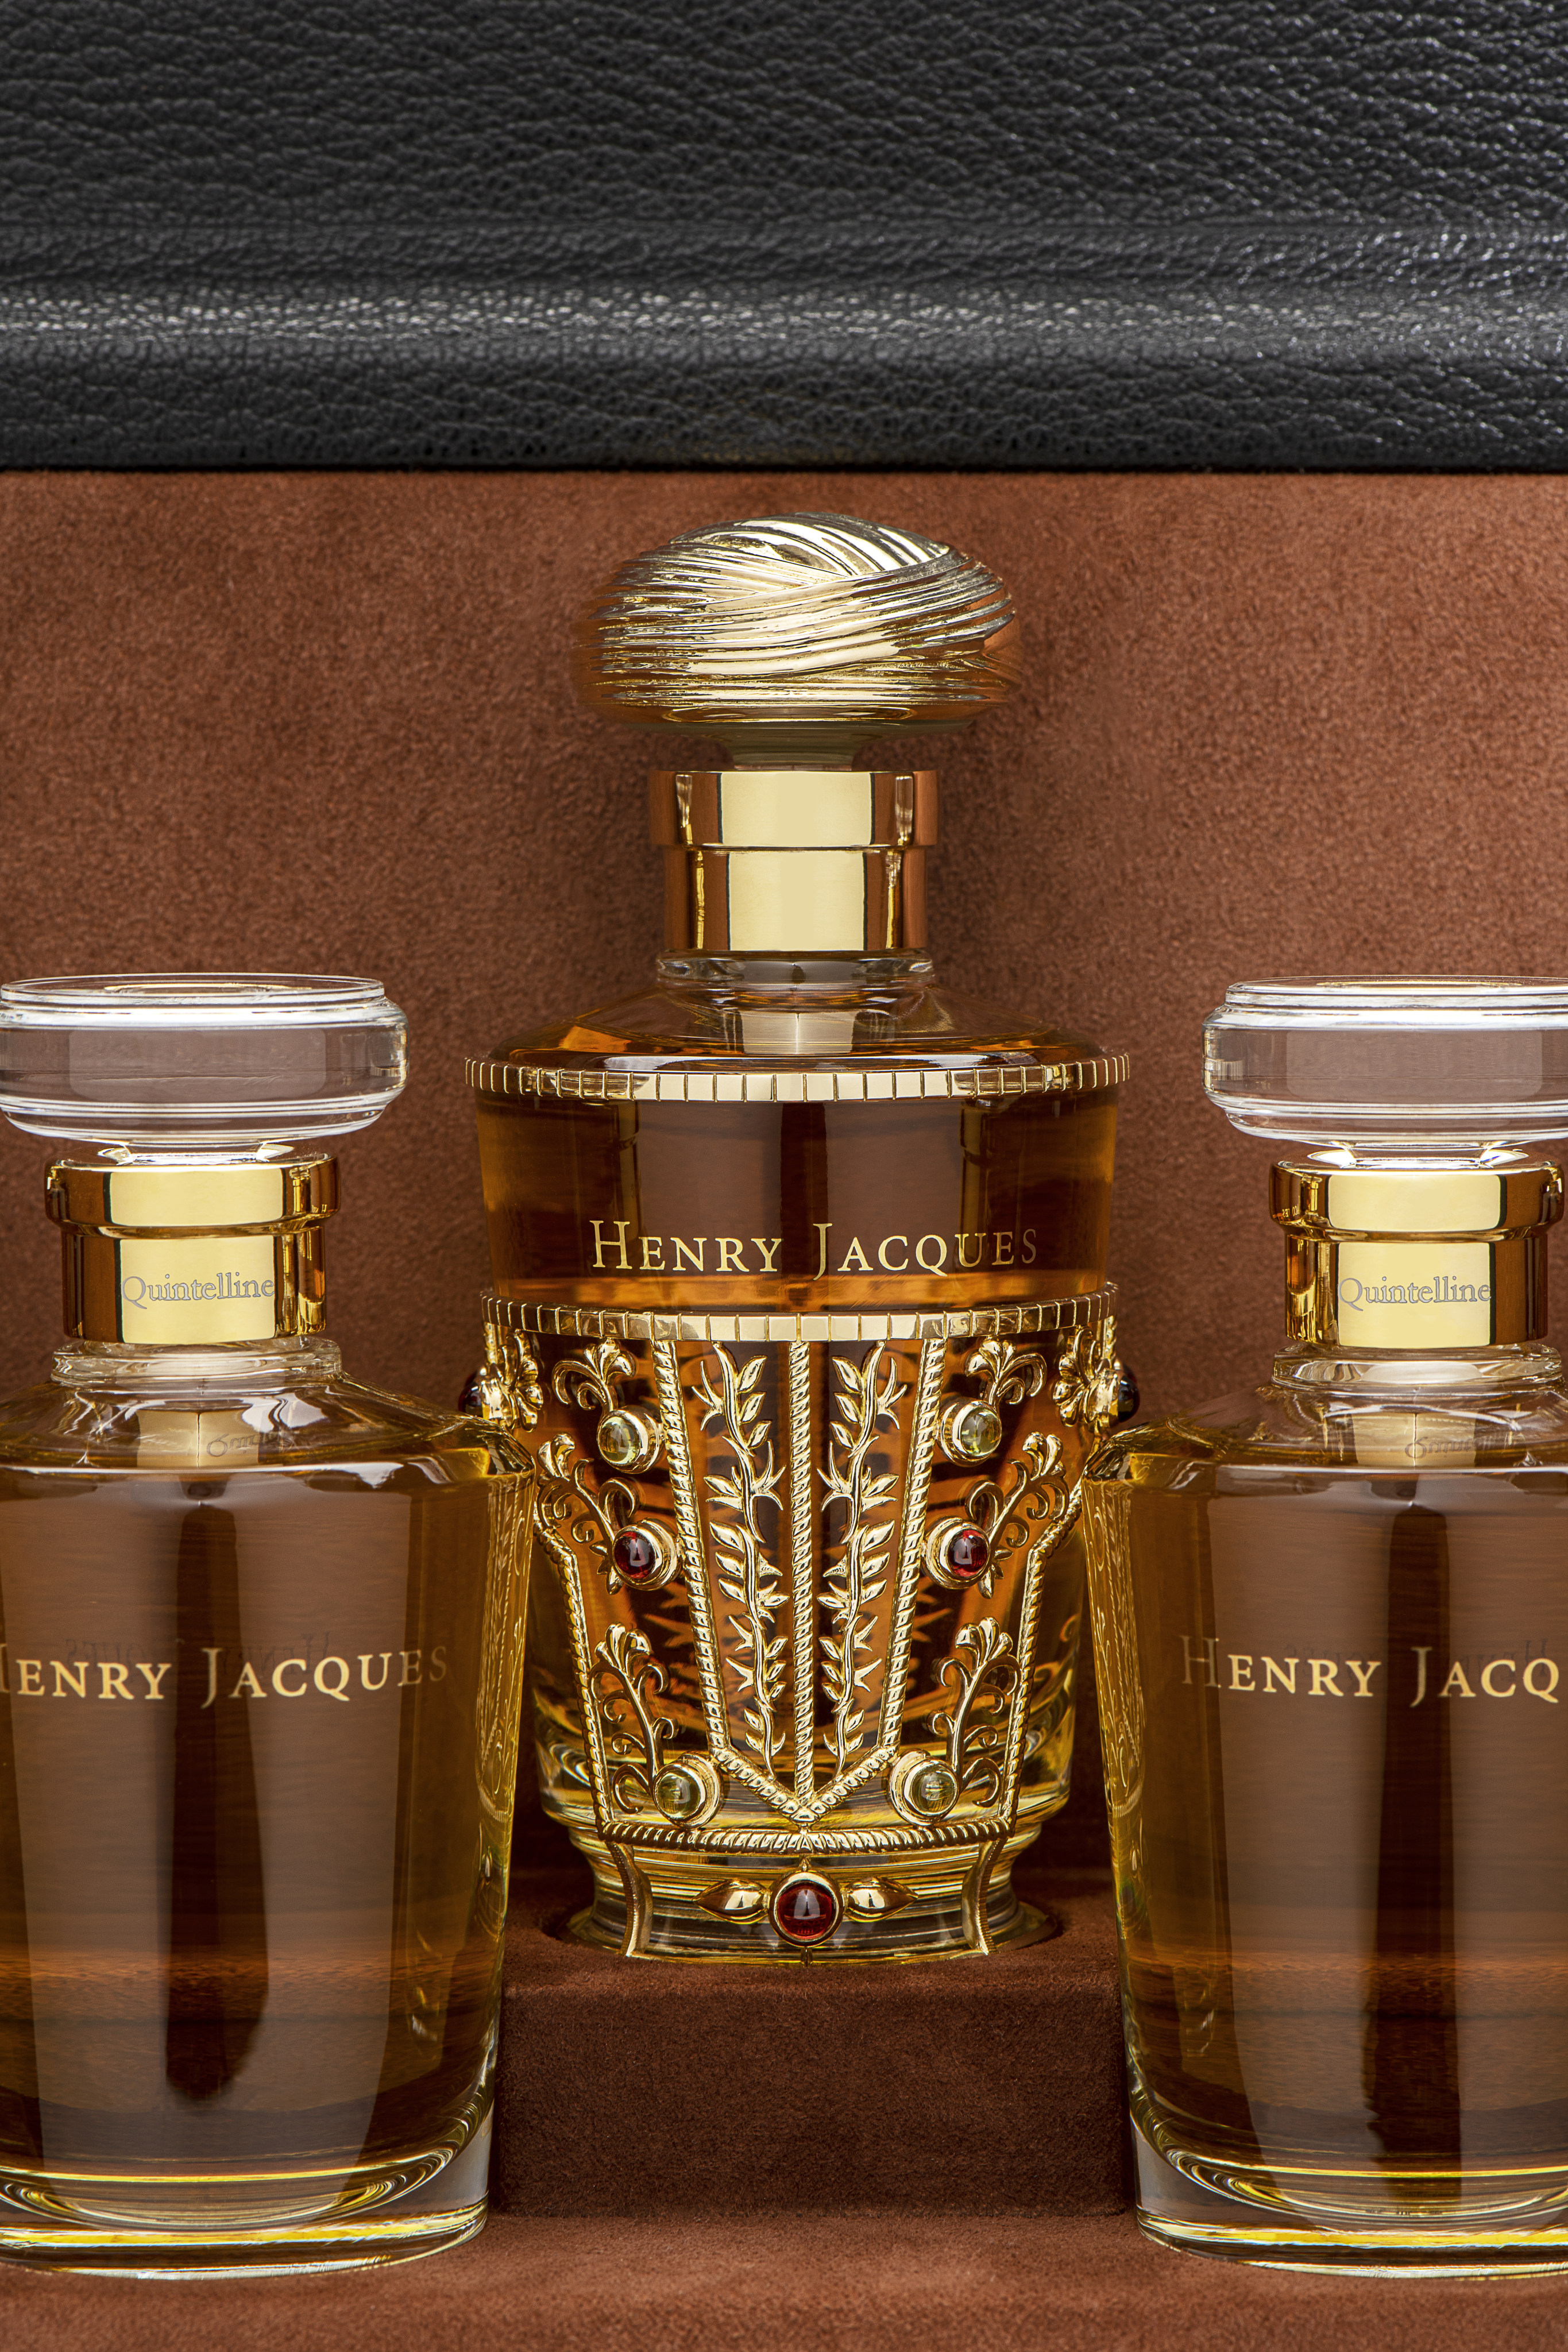 The height of luxury: a bespoke fragrance chest by Henry Jacques. Photos: Henry Jacques